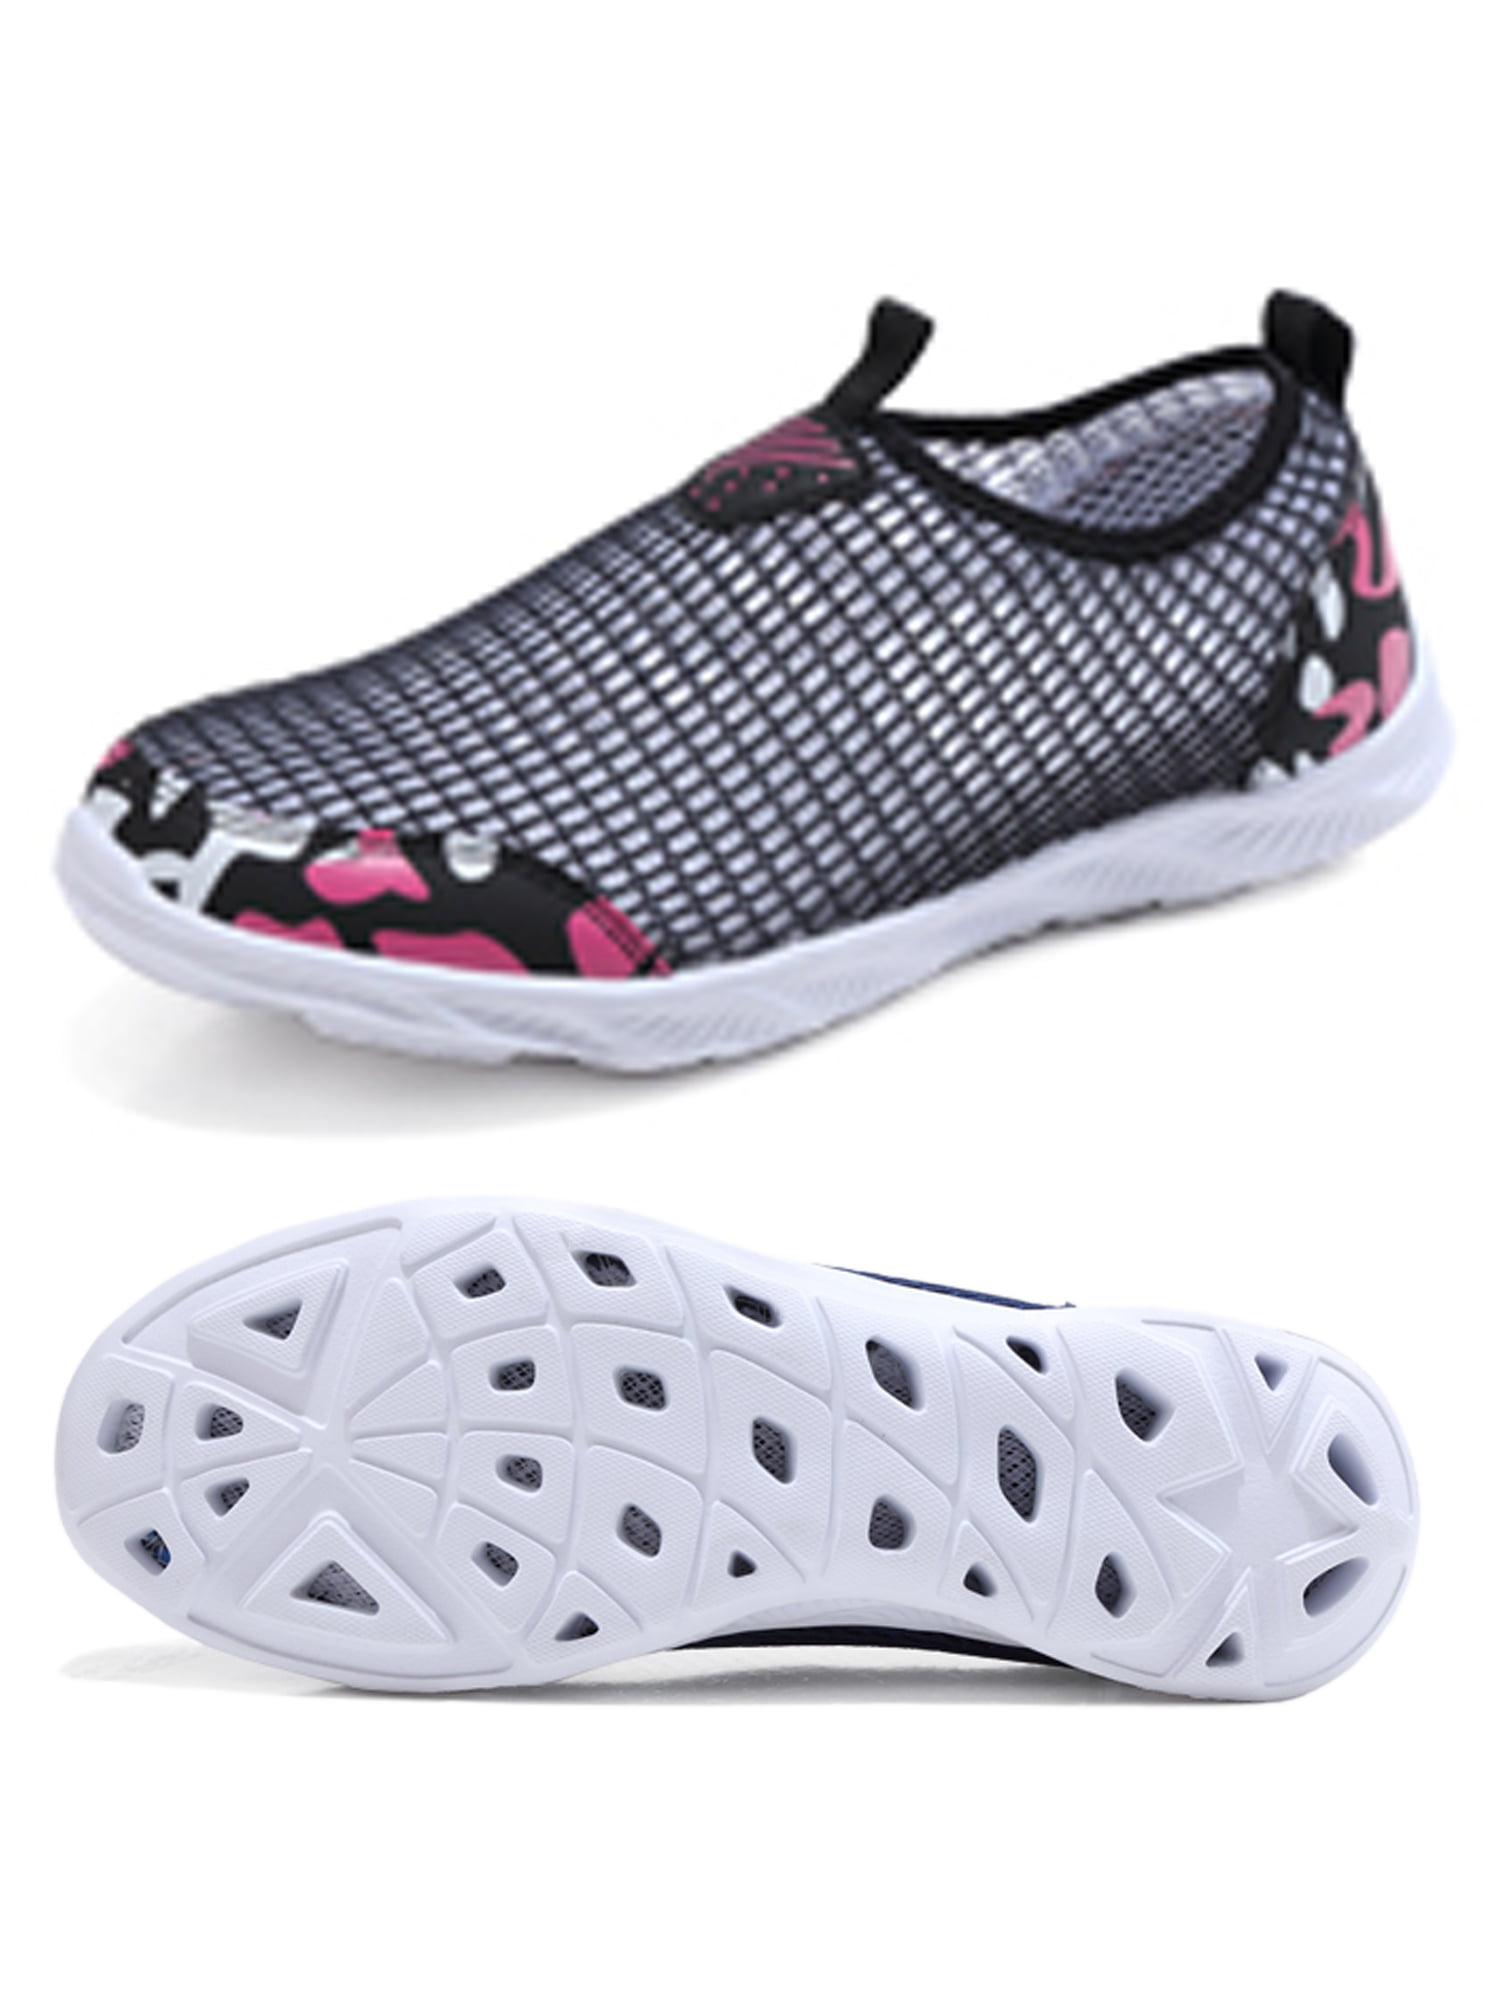 Men Water Shoes Lightweight Slip on Athletic Sneakers Breathable Mesh Quick Dry for Men